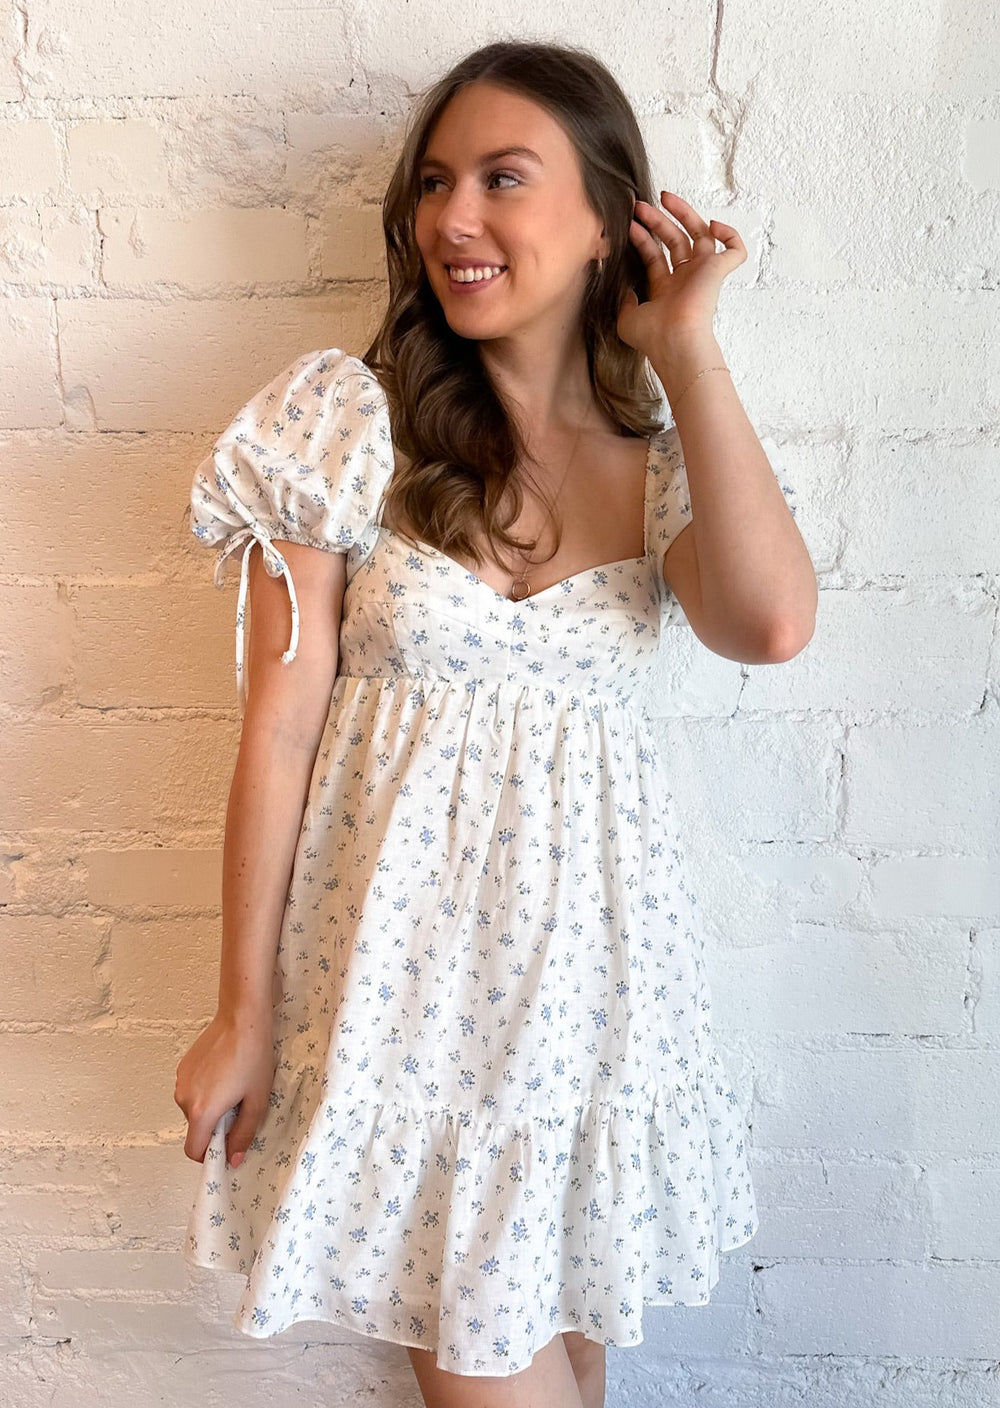 May Night Dress, Dresses, Adeline, Adeline, dallas boutique, dallas texas, texas boutique, women's boutique dallas, adeline boutique, dallas boutique, trendy boutique, affordable boutique